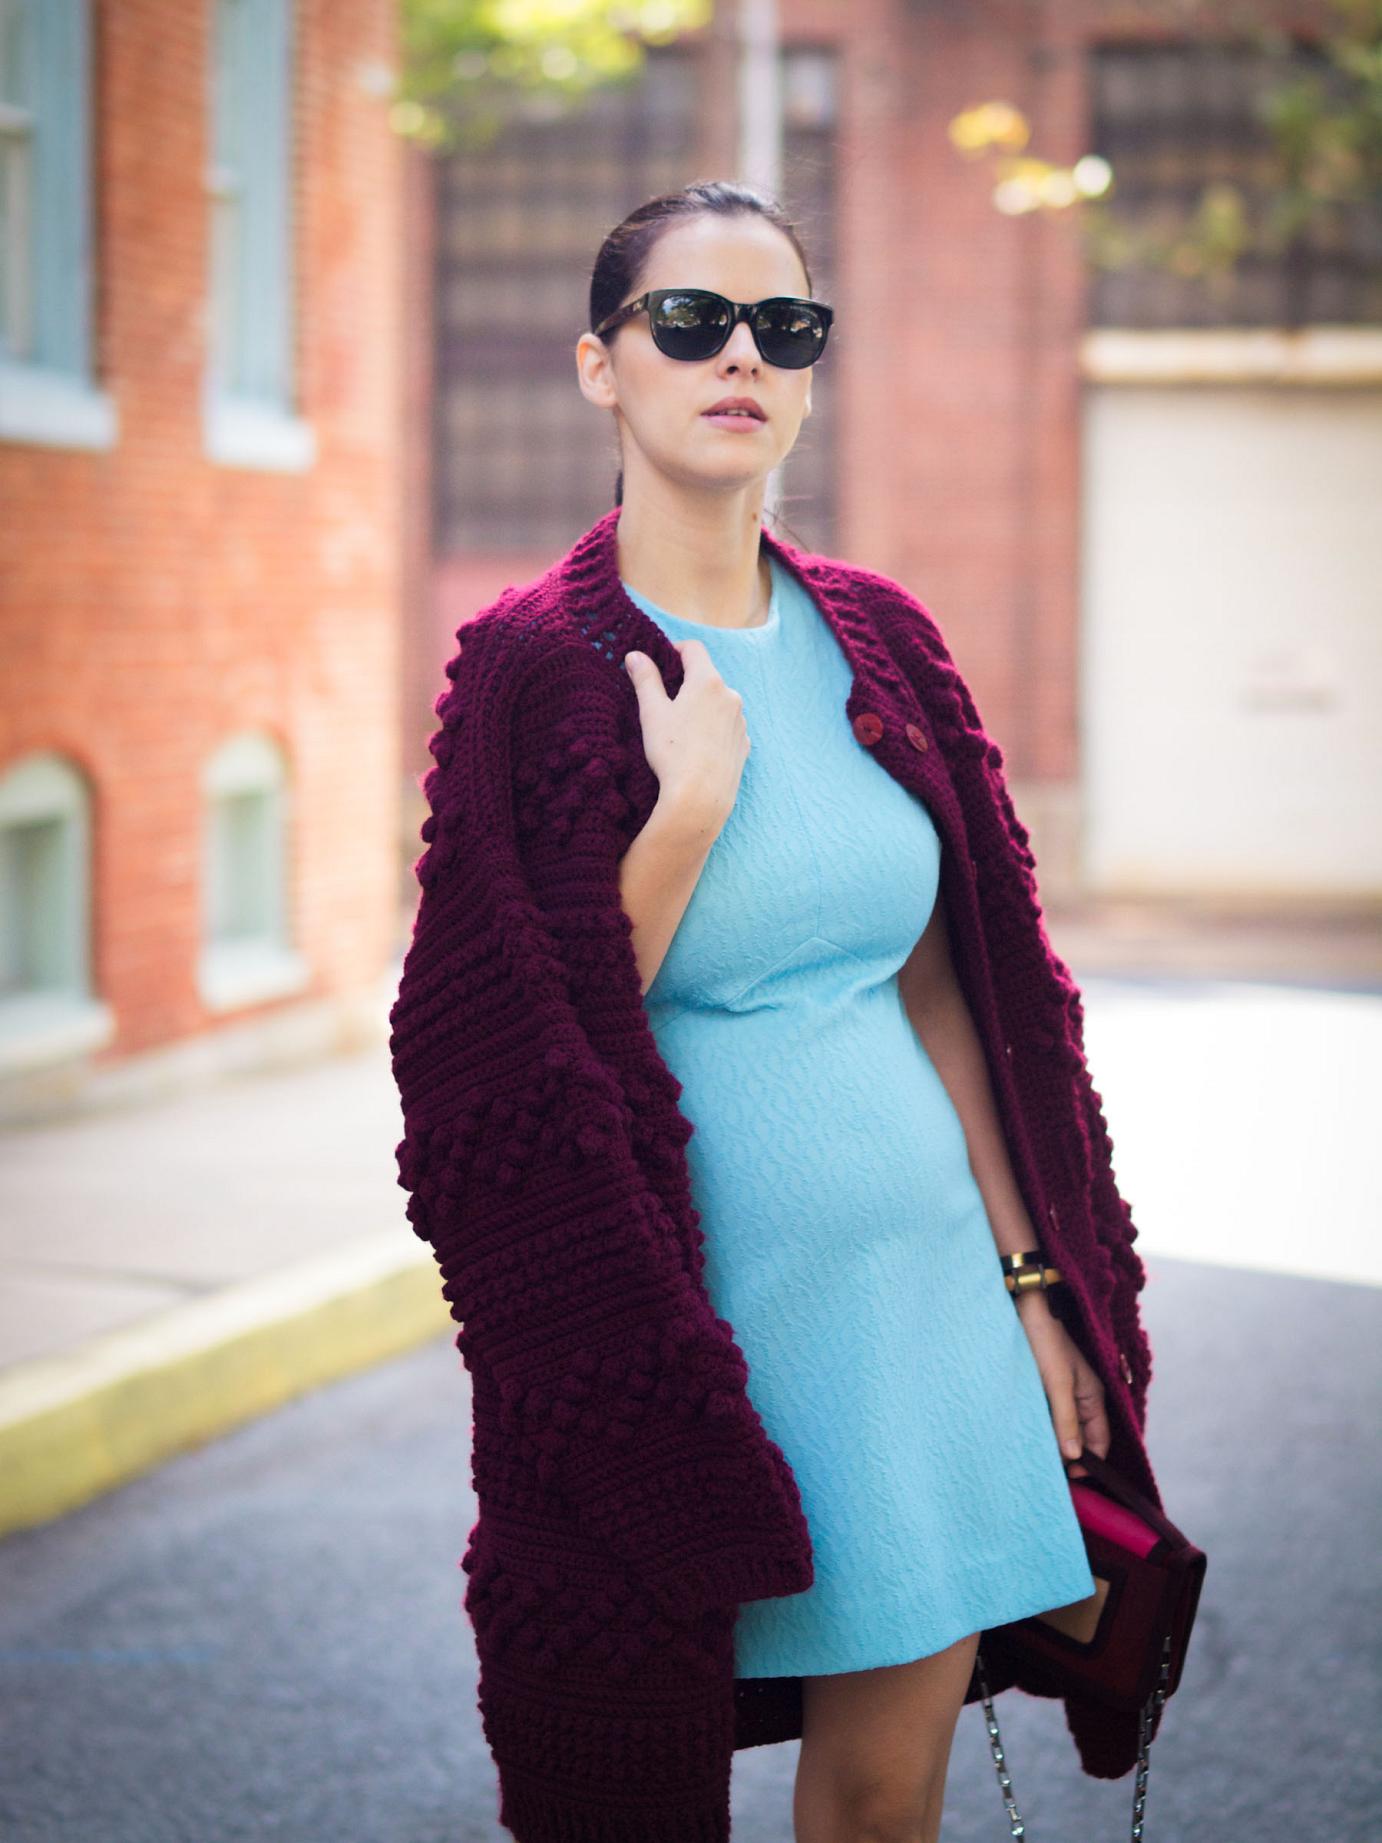 bittersweet colours, fall colors, fall trends,  fall favorites, burgundy color, burgundy trend, burgundy cardigan, vintage, blue dress. sam edelman, maternity style, street style, pierre hardy bag, cooee jewelry, bump style